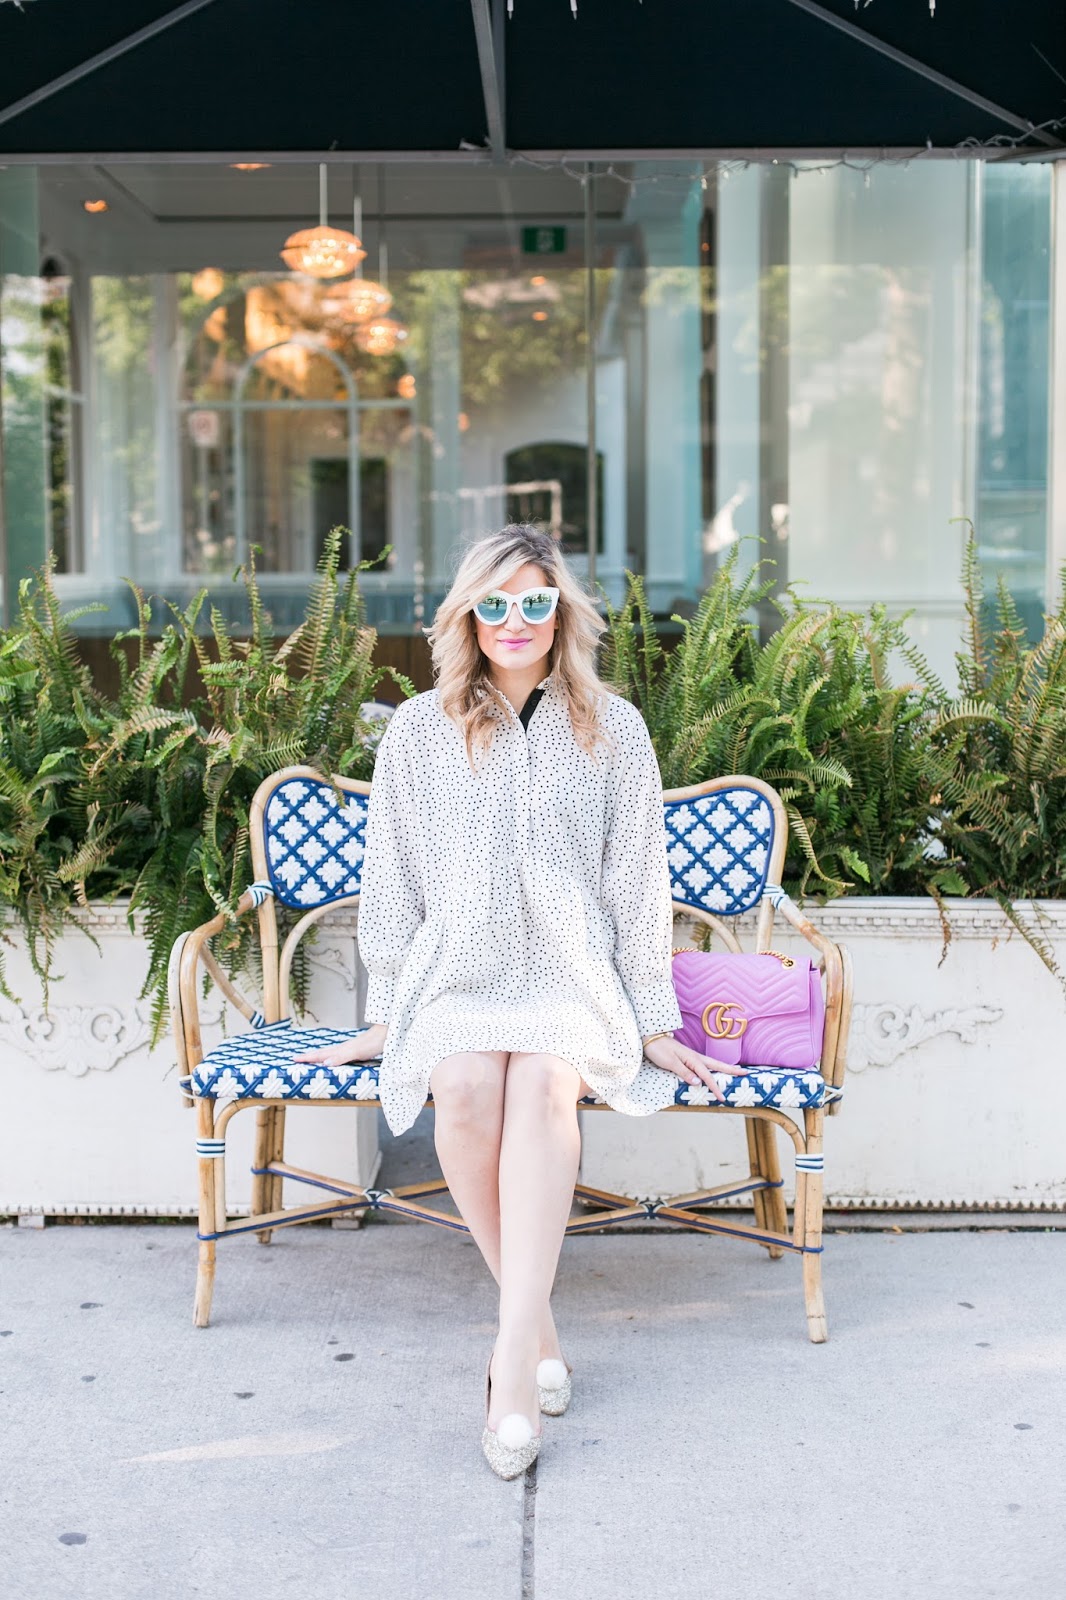 Bijuleni - My Go to Casual Everyday Outfit. Shift dress, sparkly silver flats, GG Marmont Maxi